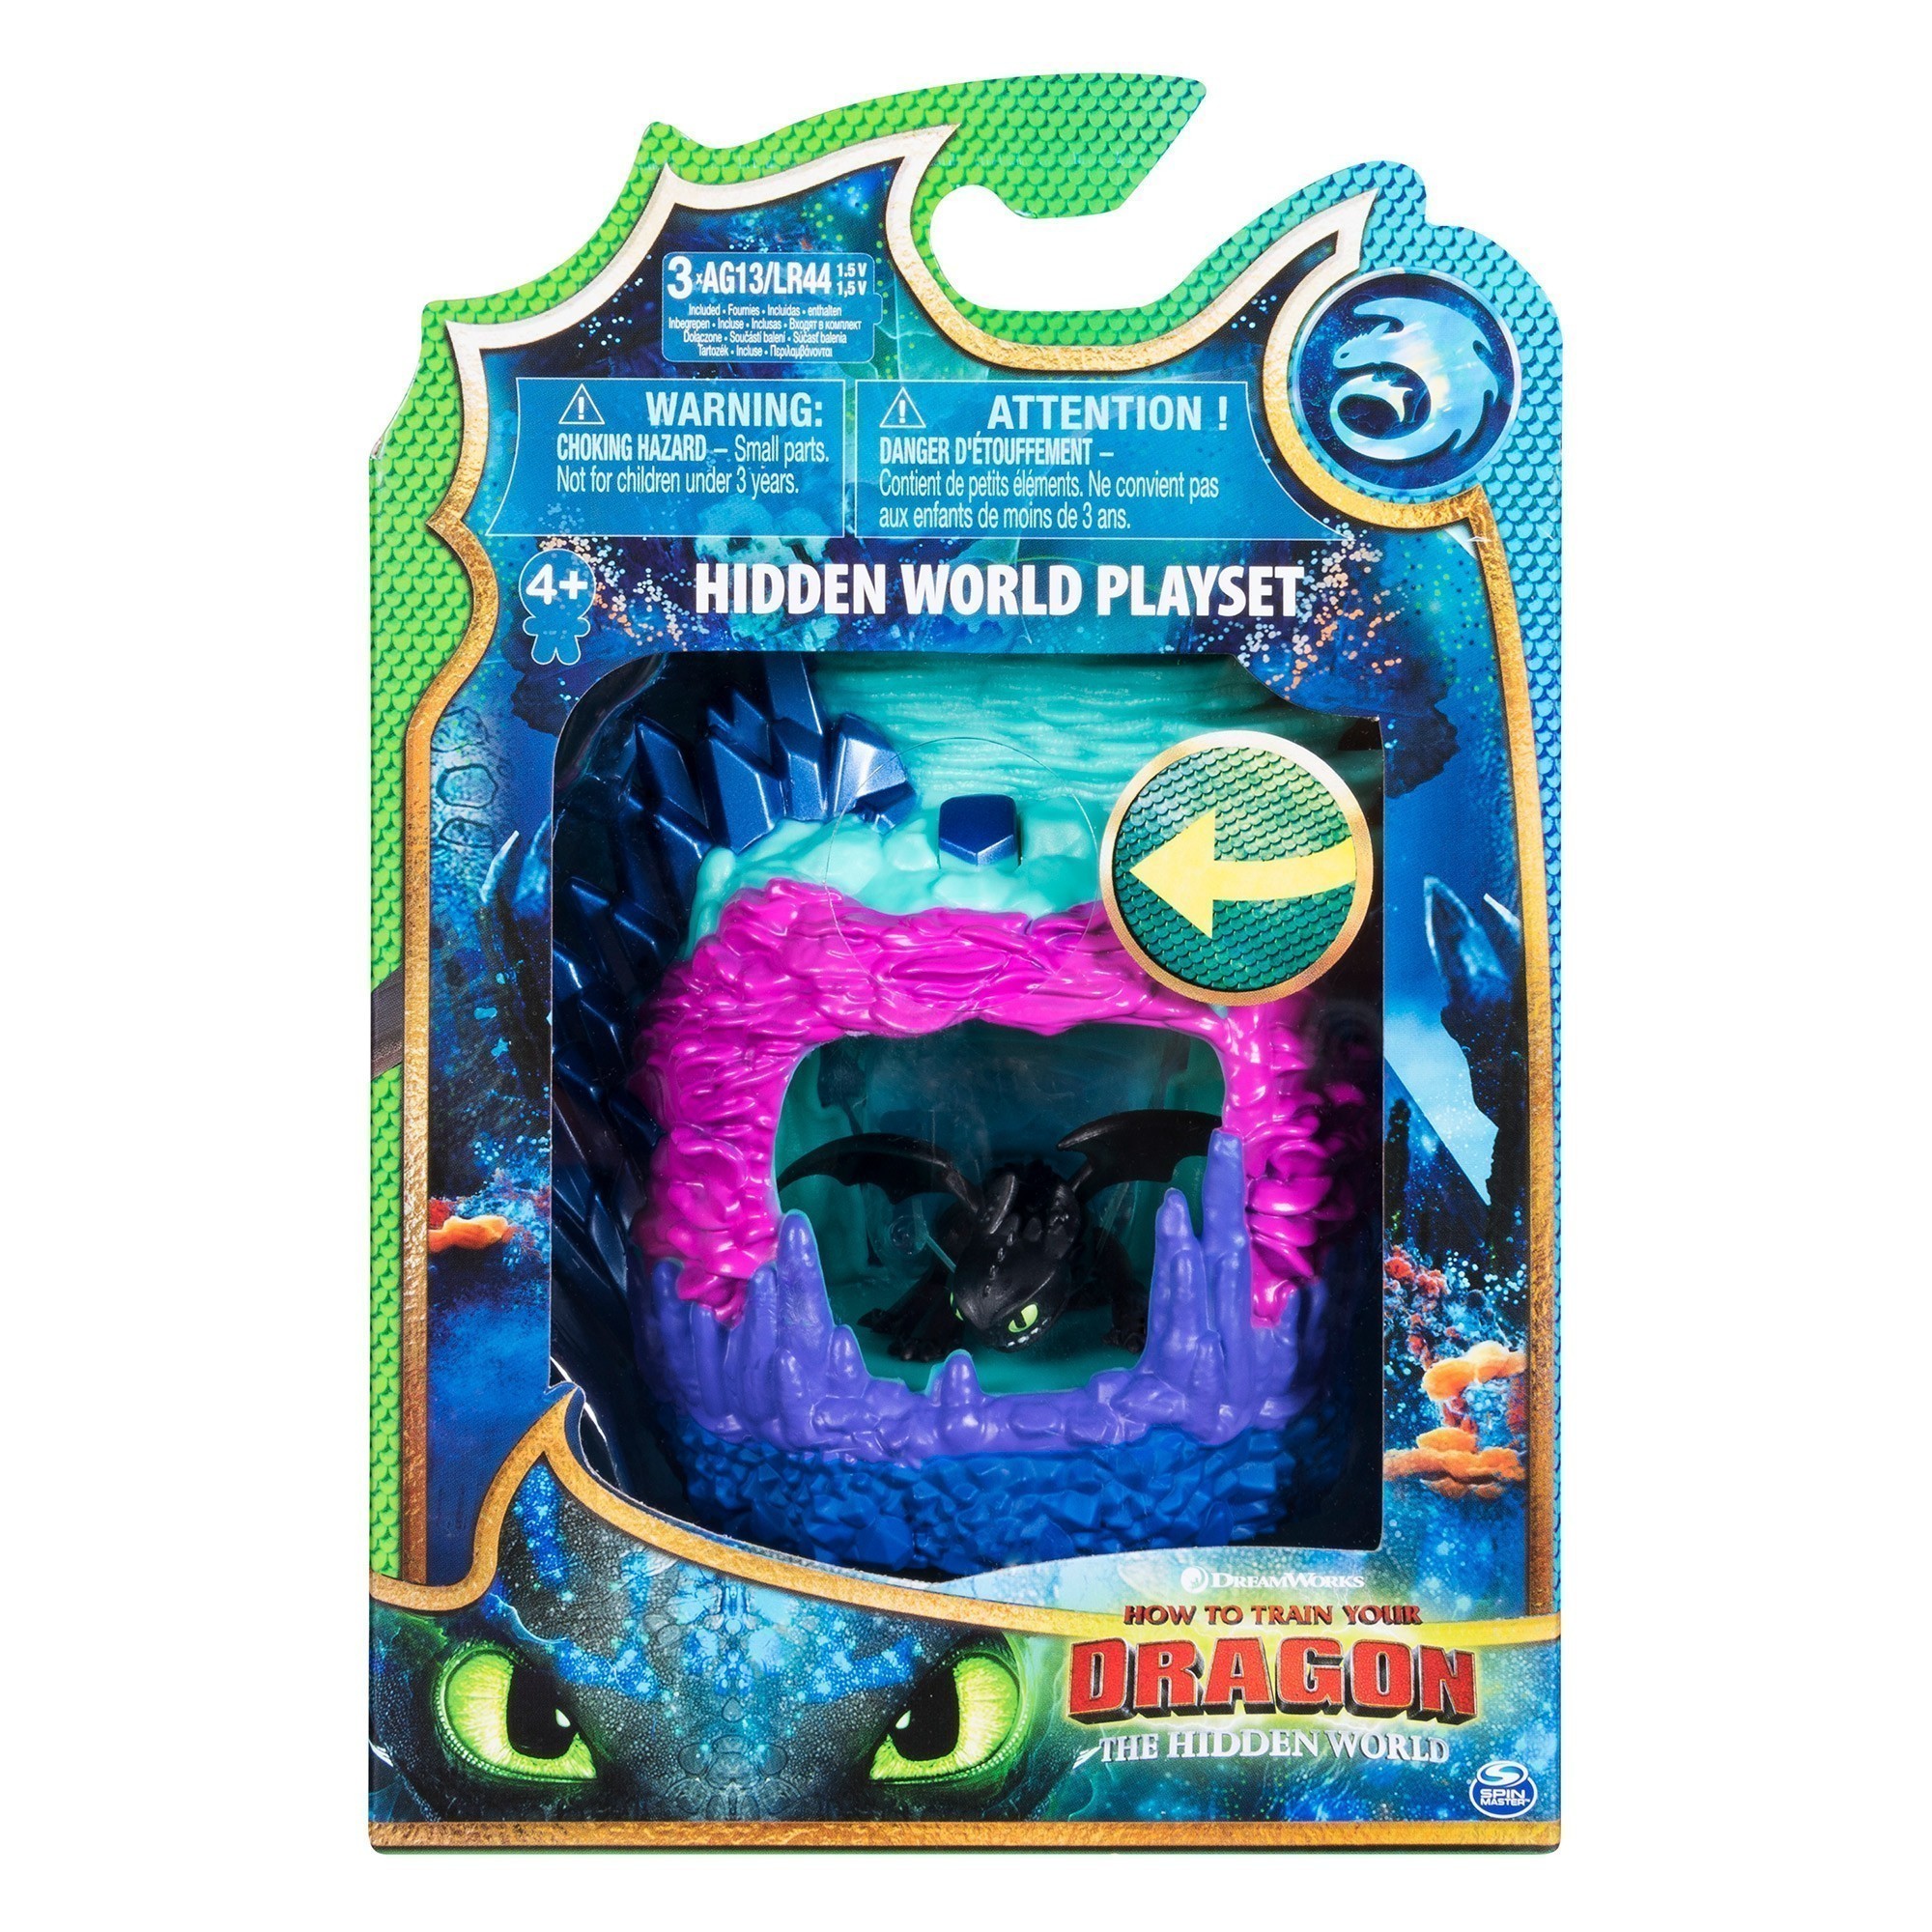 Dreamworks - How To Train Your Dragon 3 - Dragon Lair Playset - Toothless